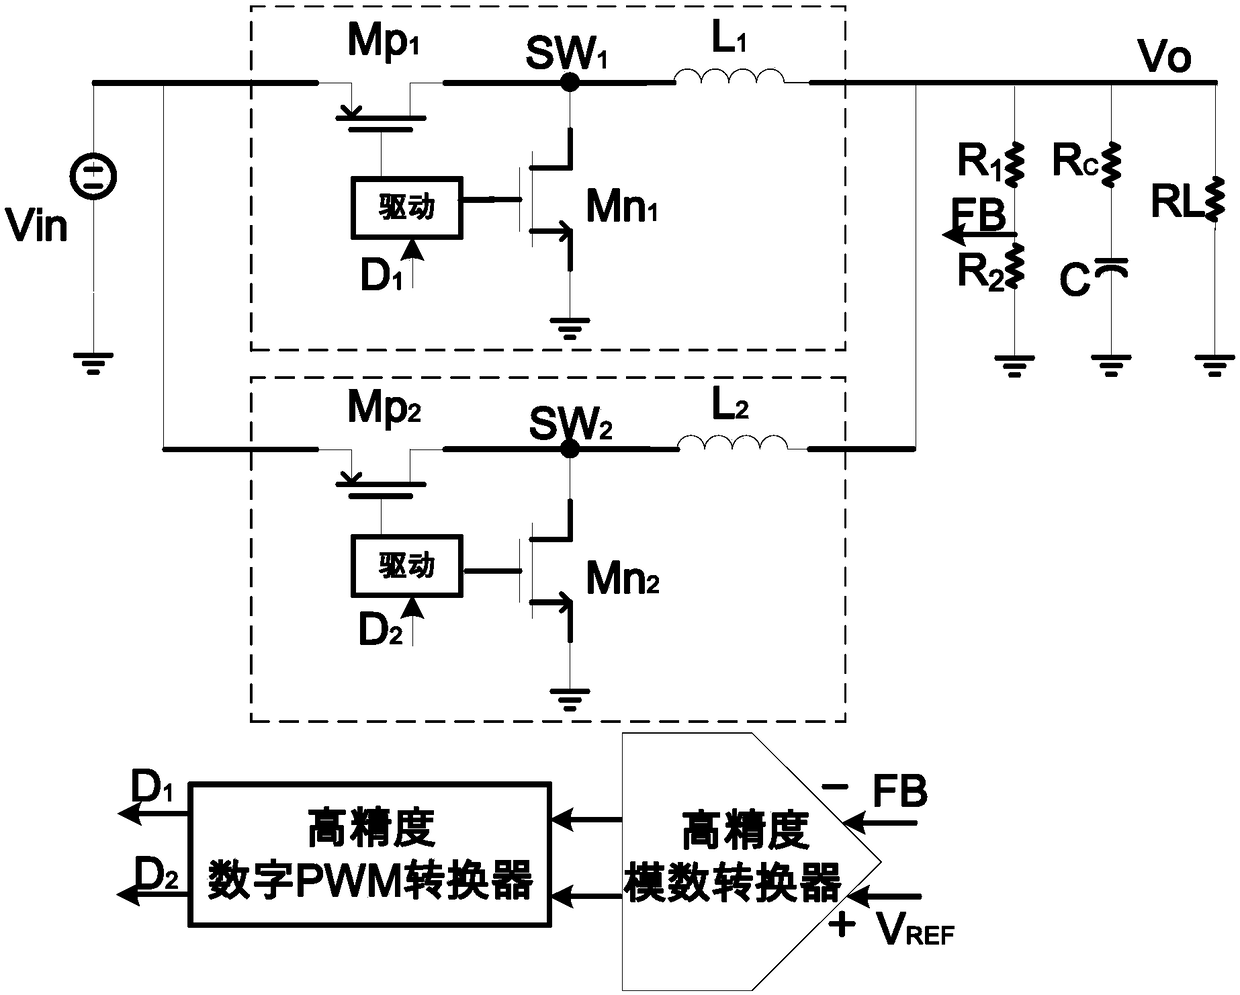 A power management chip based on cot control two-phase buck circuit with current sharing function